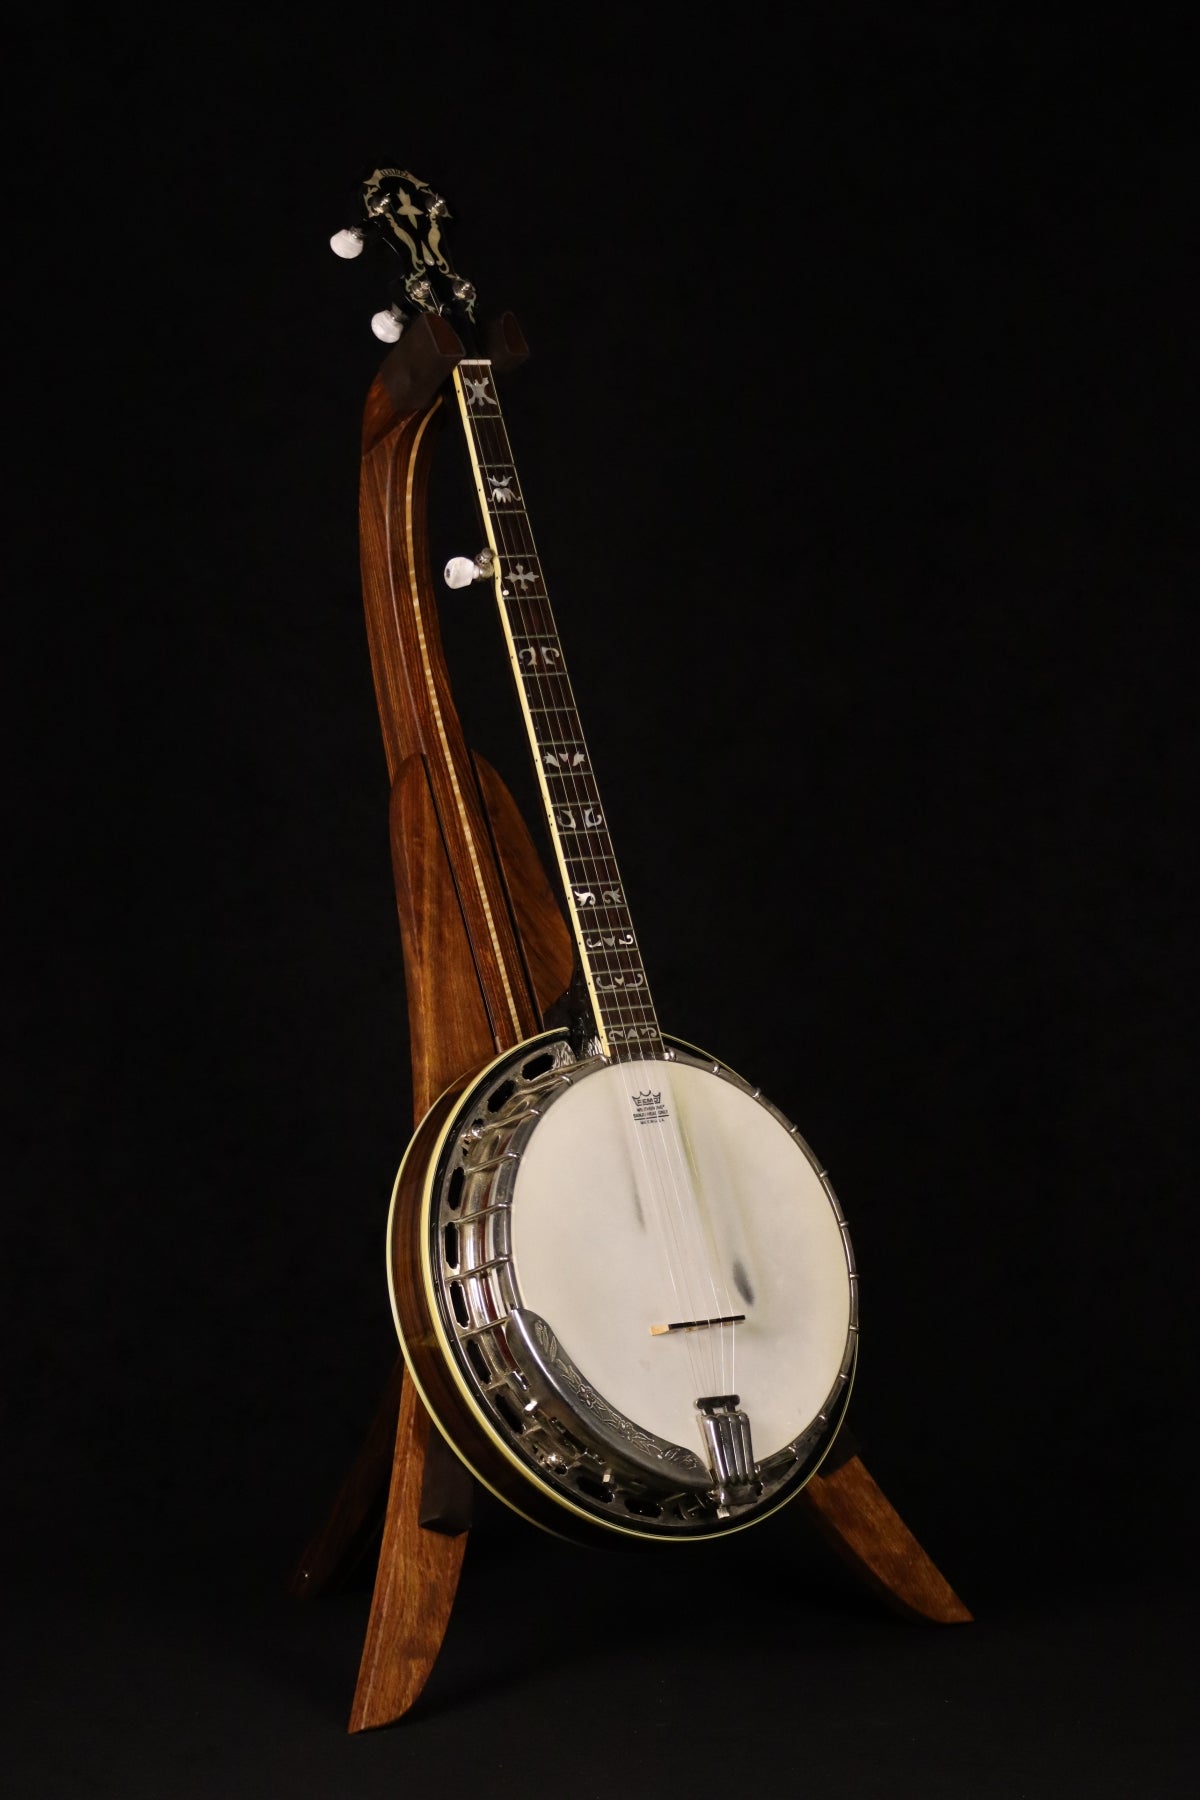 Folding chechen Caribbean rosewood and curly maple wood banjo floor stand full front image with Alvarez banjo